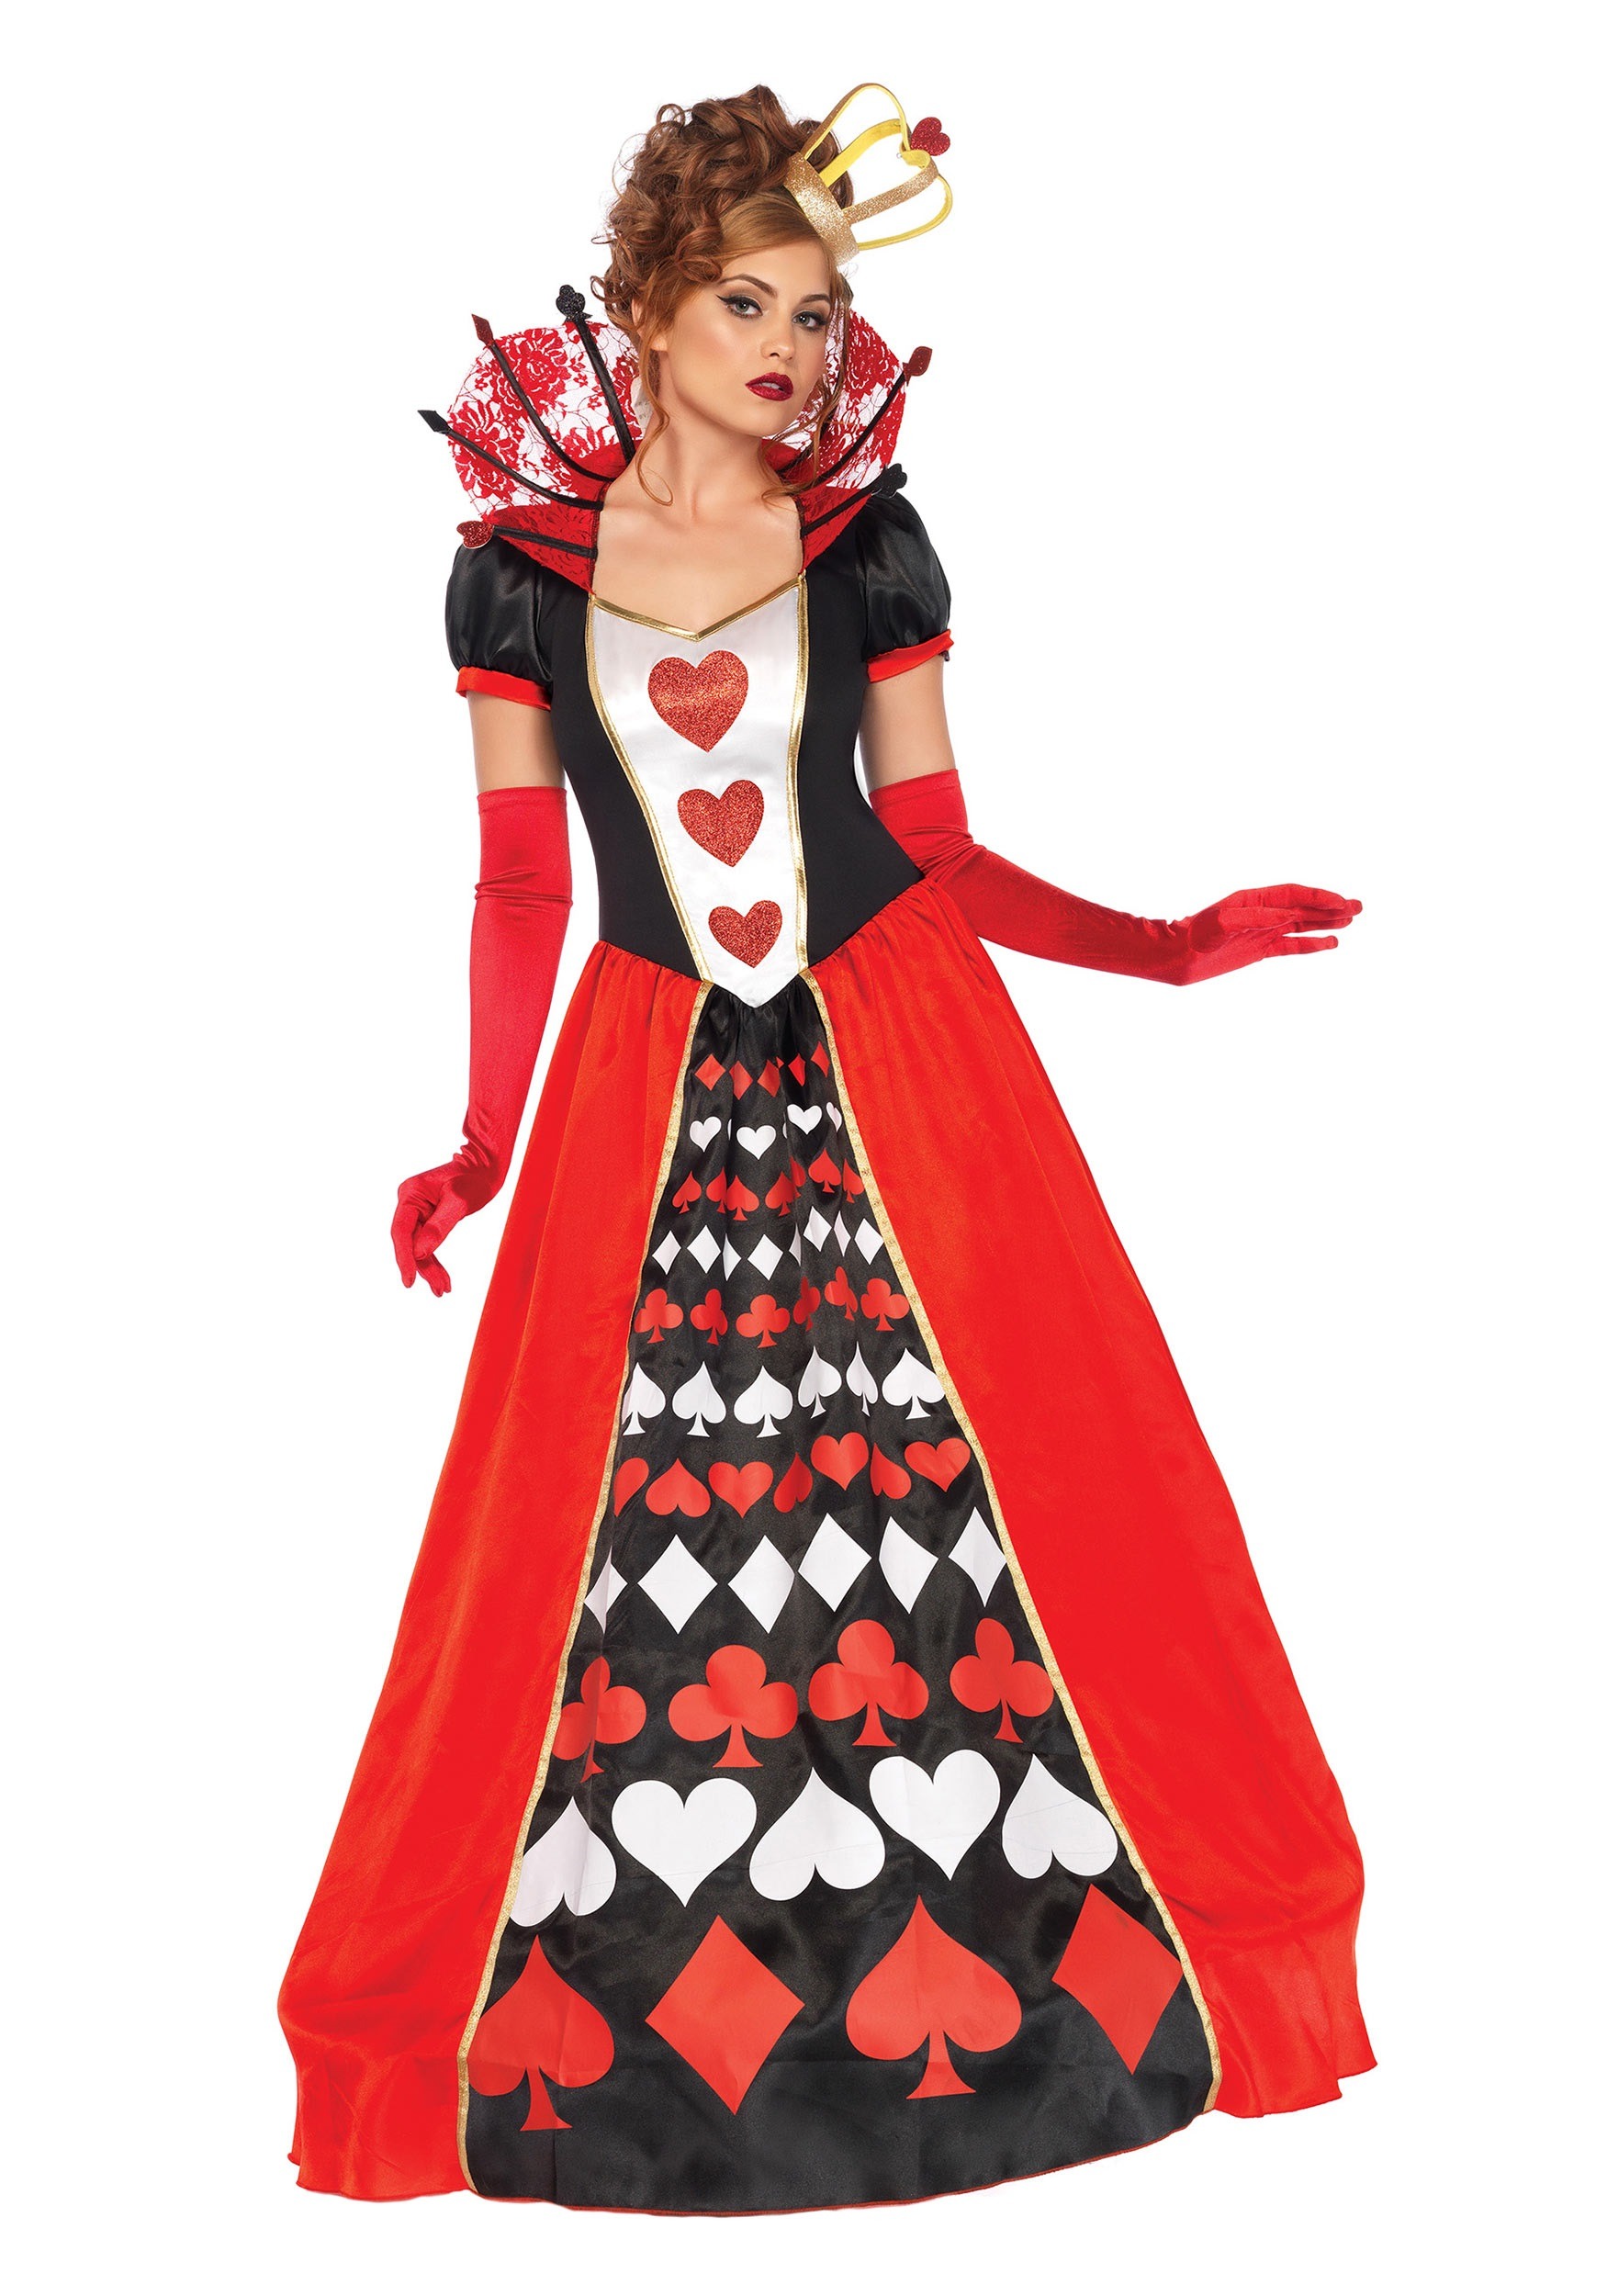 Image of Women's Deluxe Queen of Hearts Costume ID LE85593-L